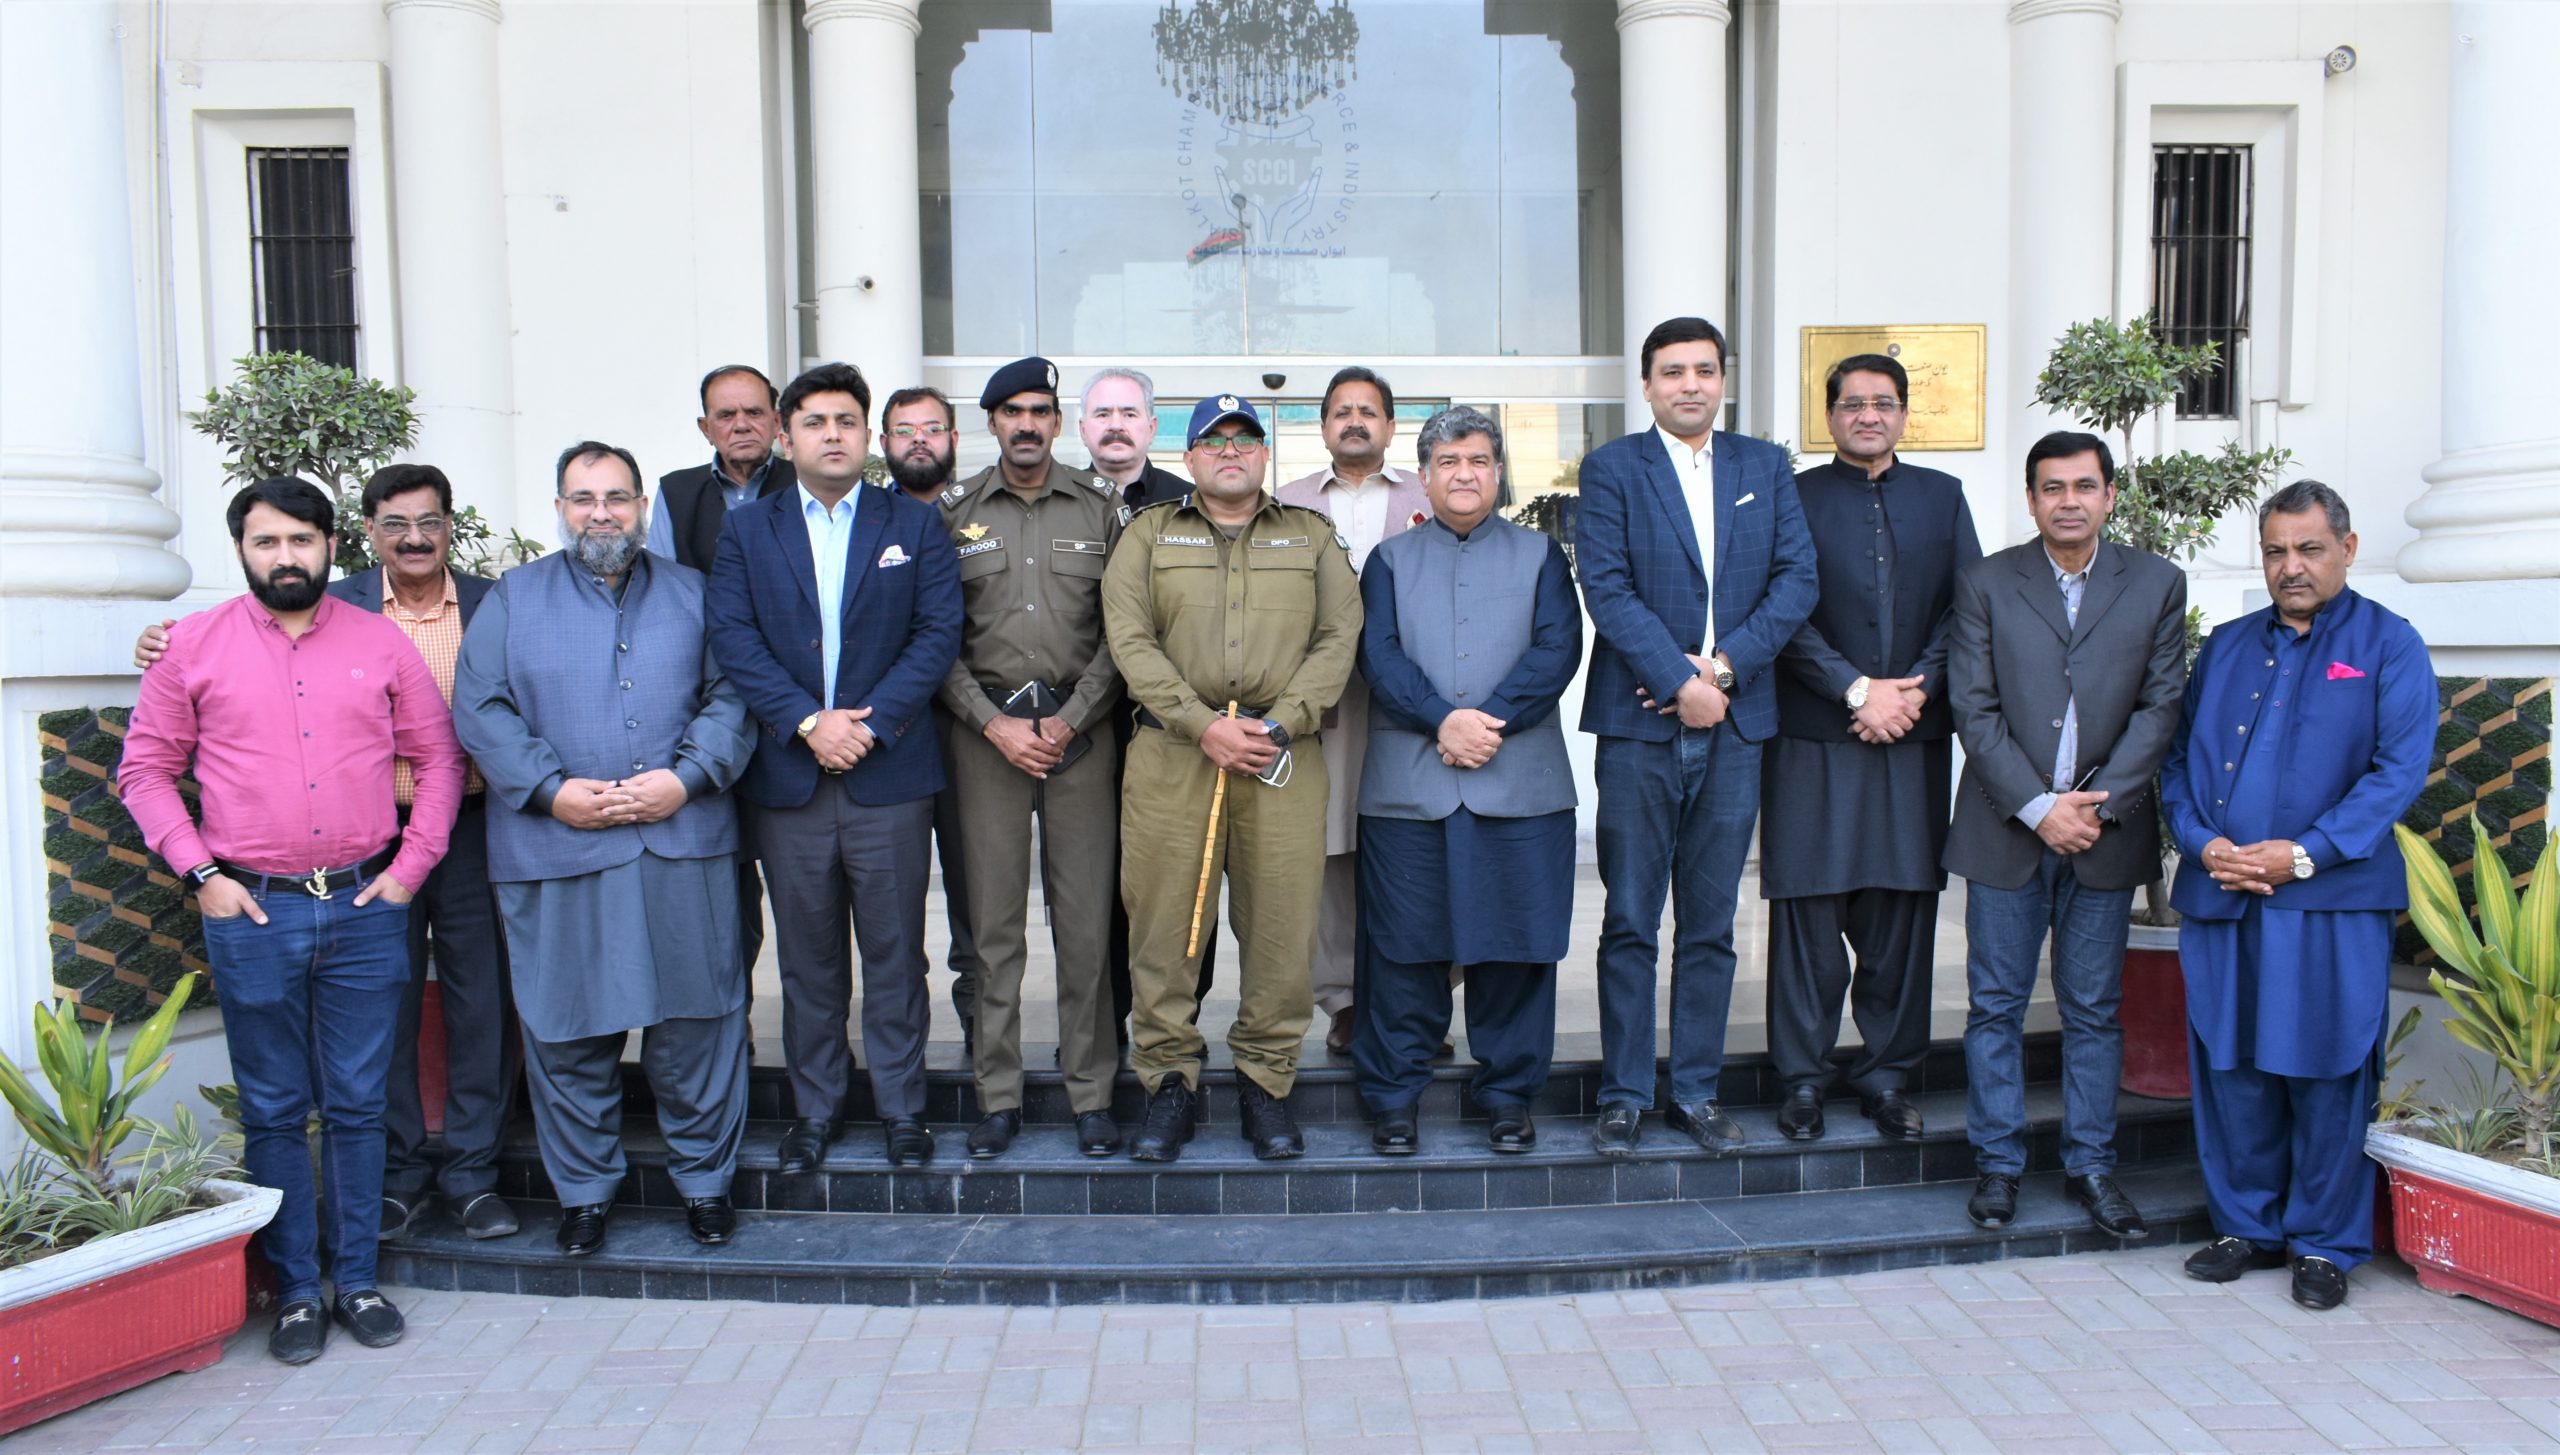 On March 10, 2022, Mr. Hassan Iqbal, District Police Officer Sialkot visited the Sialkot Chamber of Commerce & Industry and had a meeting with Mian Imran Akbar, President Sialkot Chamber.  During the meeting, Mian Imran Akbar said that Safe City Project should be Launched in Sialkot as per the criterion of safe city project being launched in other big cities of Punjab like Lahore etc. Mr. Hassan Iqbal was requested to establish a Driving License Office at premises of Sialkot Chamber. On which, he assured his all-possible support regarding this facilitation office. President Chamber said that District police Sialkot should also take effective measures to improve the traffic management system of city especially during the school and factories workers leaving hours.